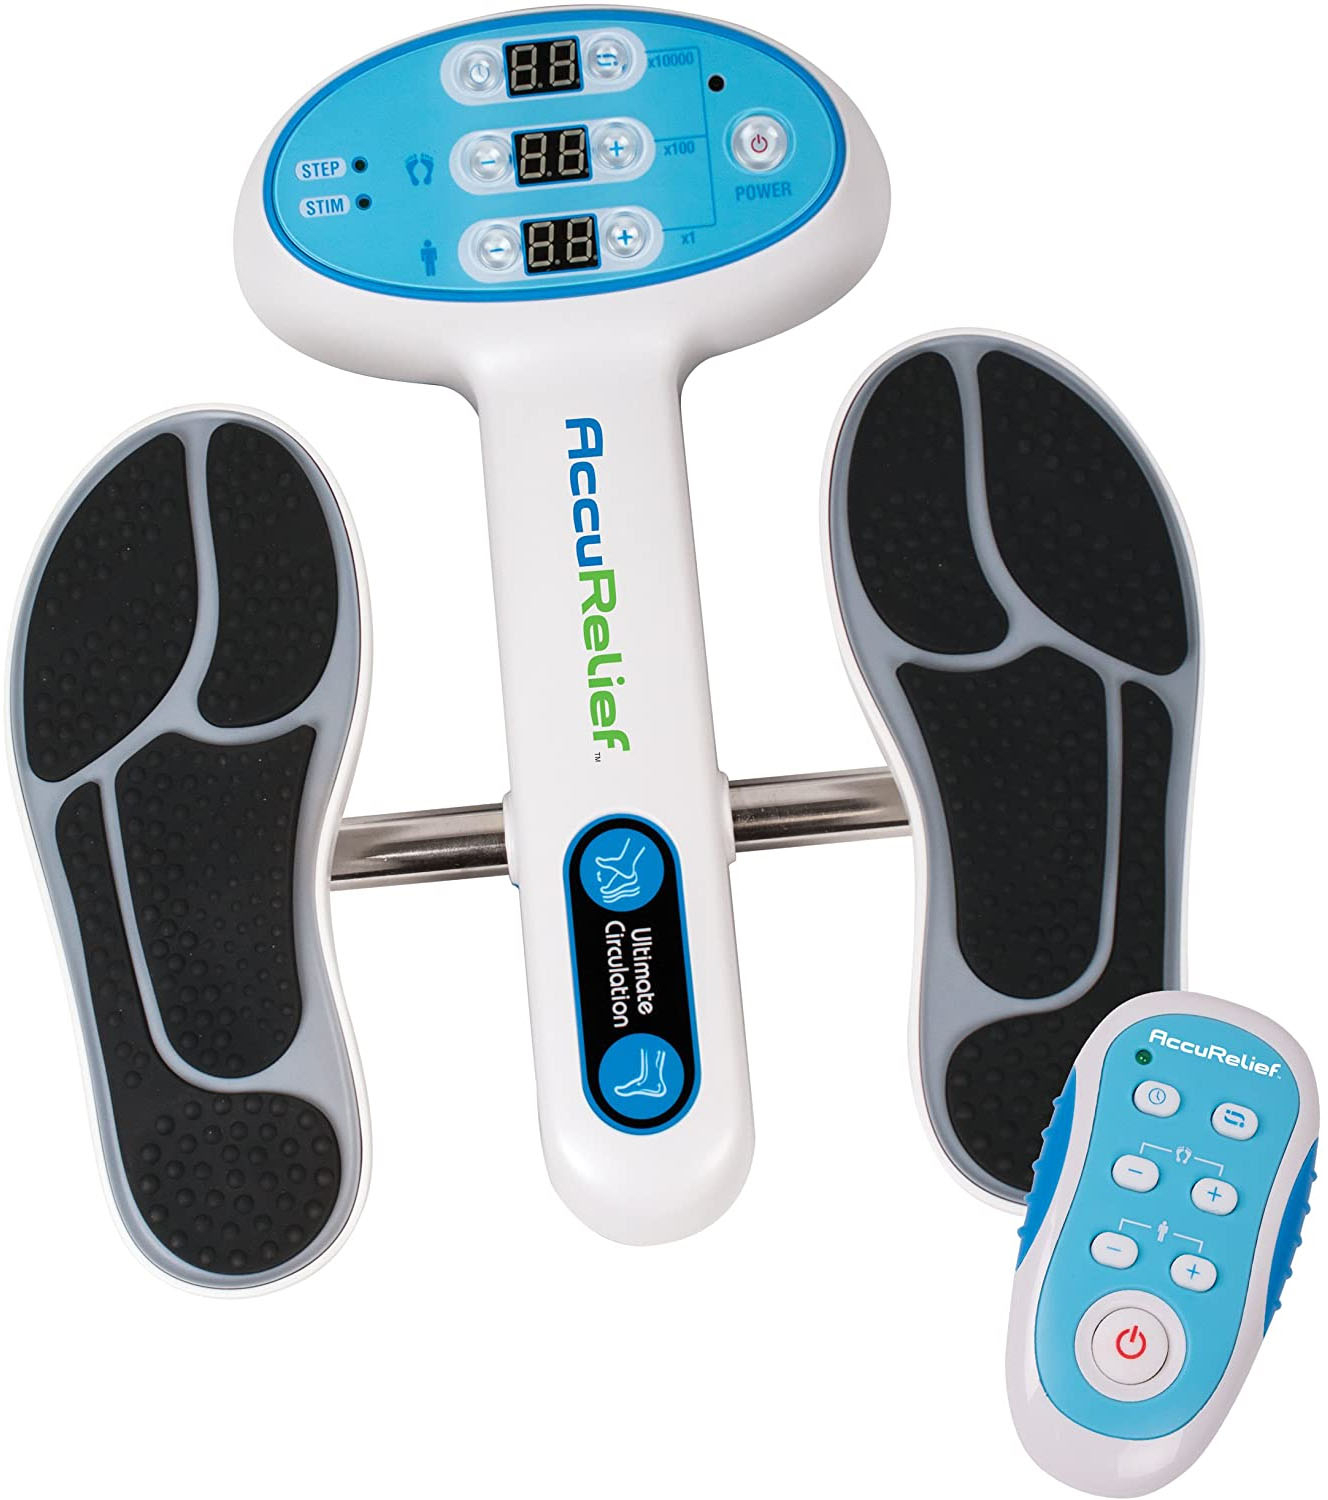 Angle View: AccuRelief Ultimate Foot Circulator with Remote for Body Pain, Electrodes Pads for TENS Unit